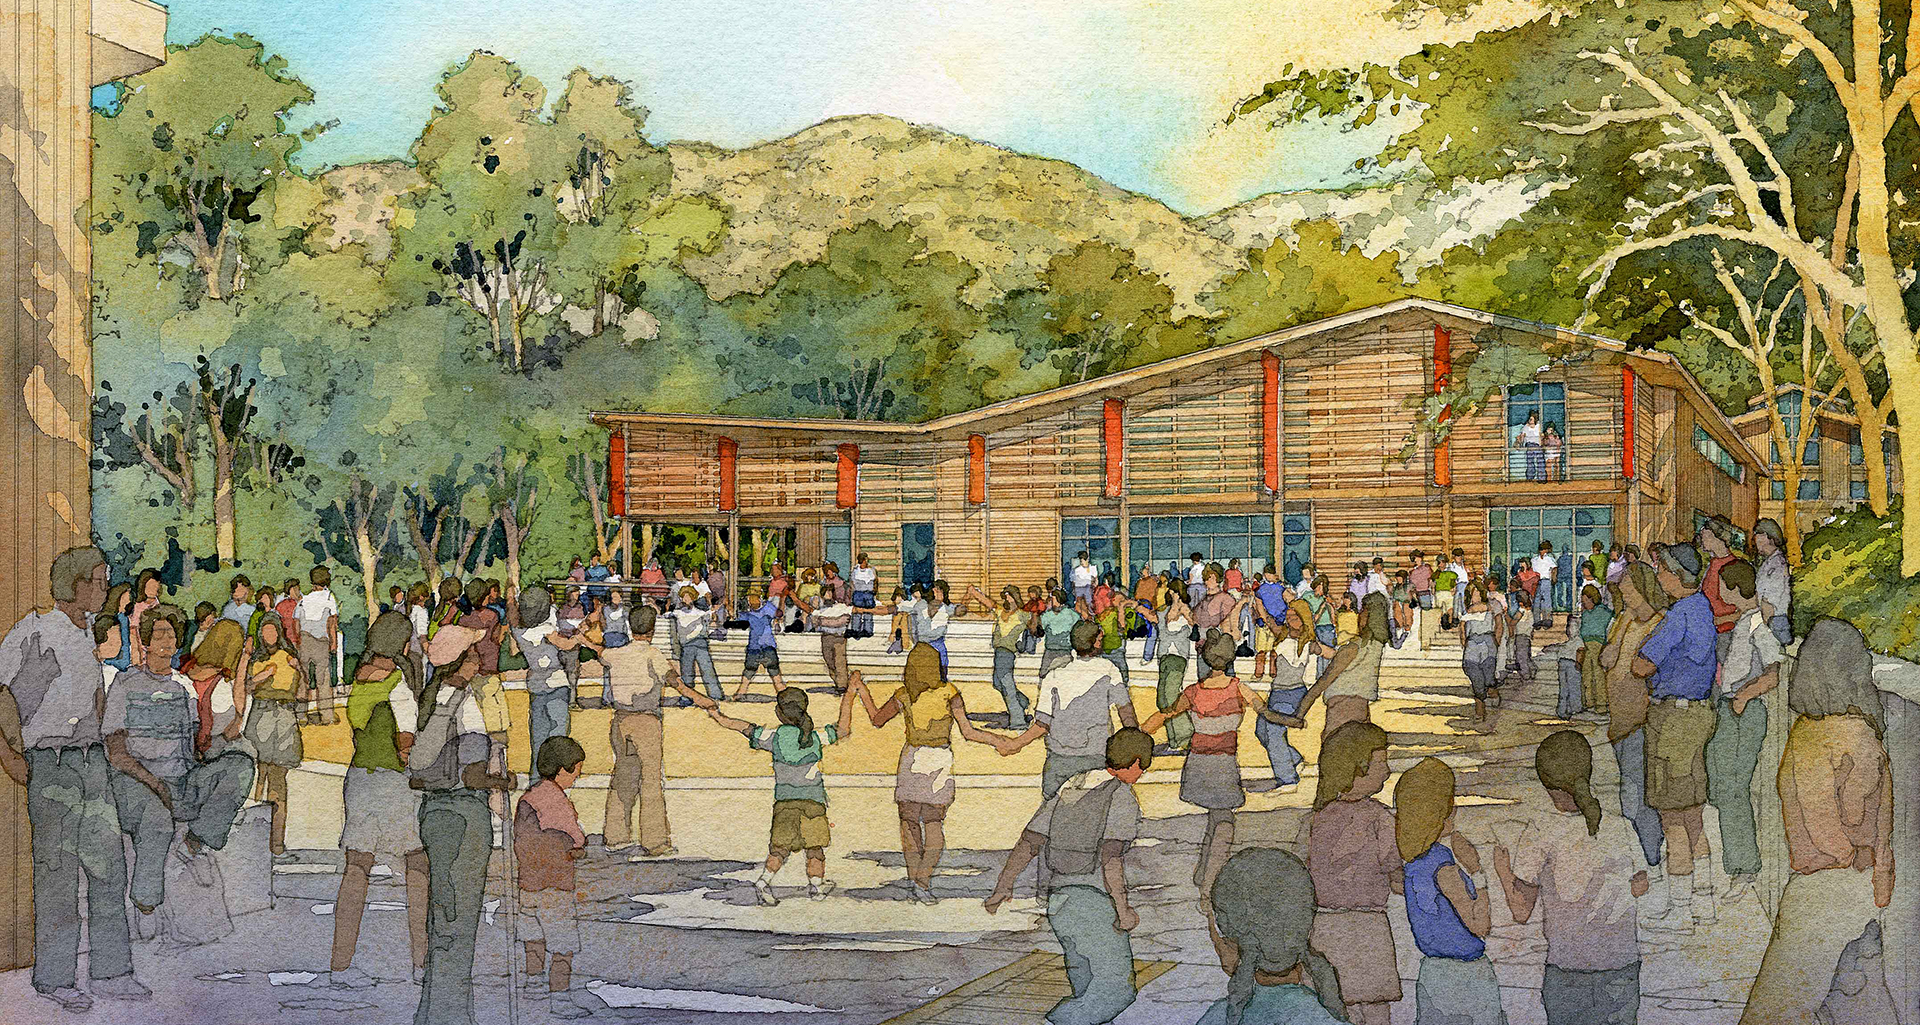 Wilshire Boulevard Temple Camps | Renderings by Al Forster